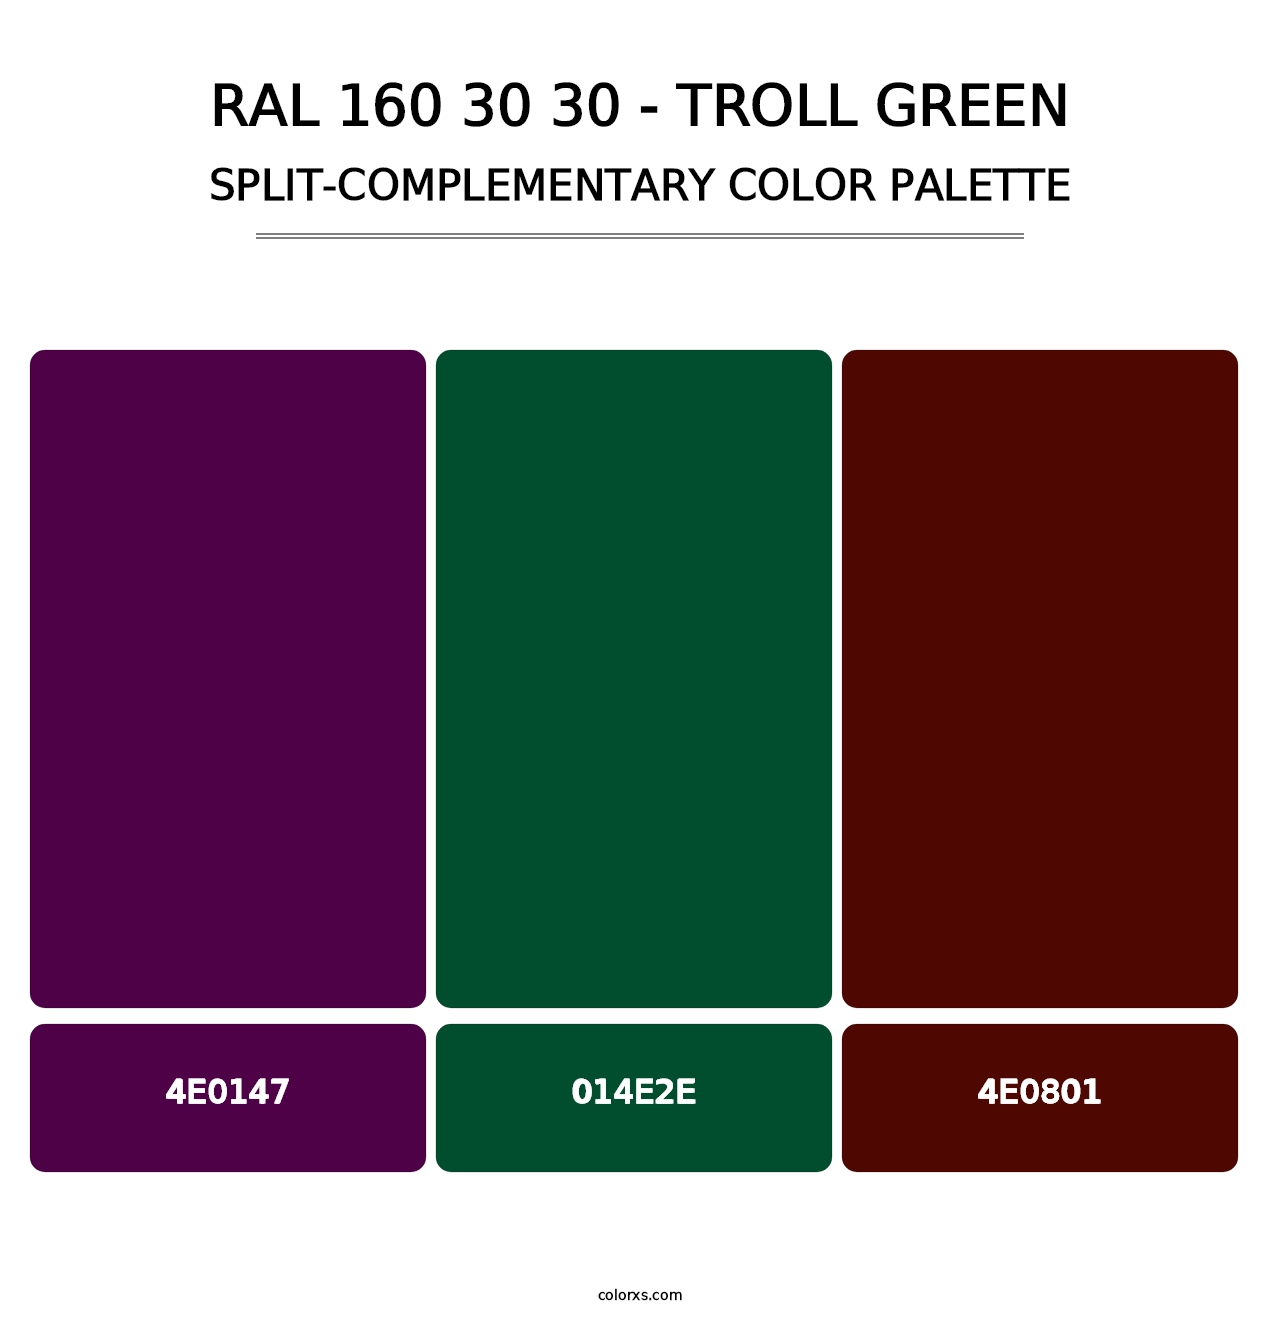 RAL 160 30 30 - Troll Green - Split-Complementary Color Palette